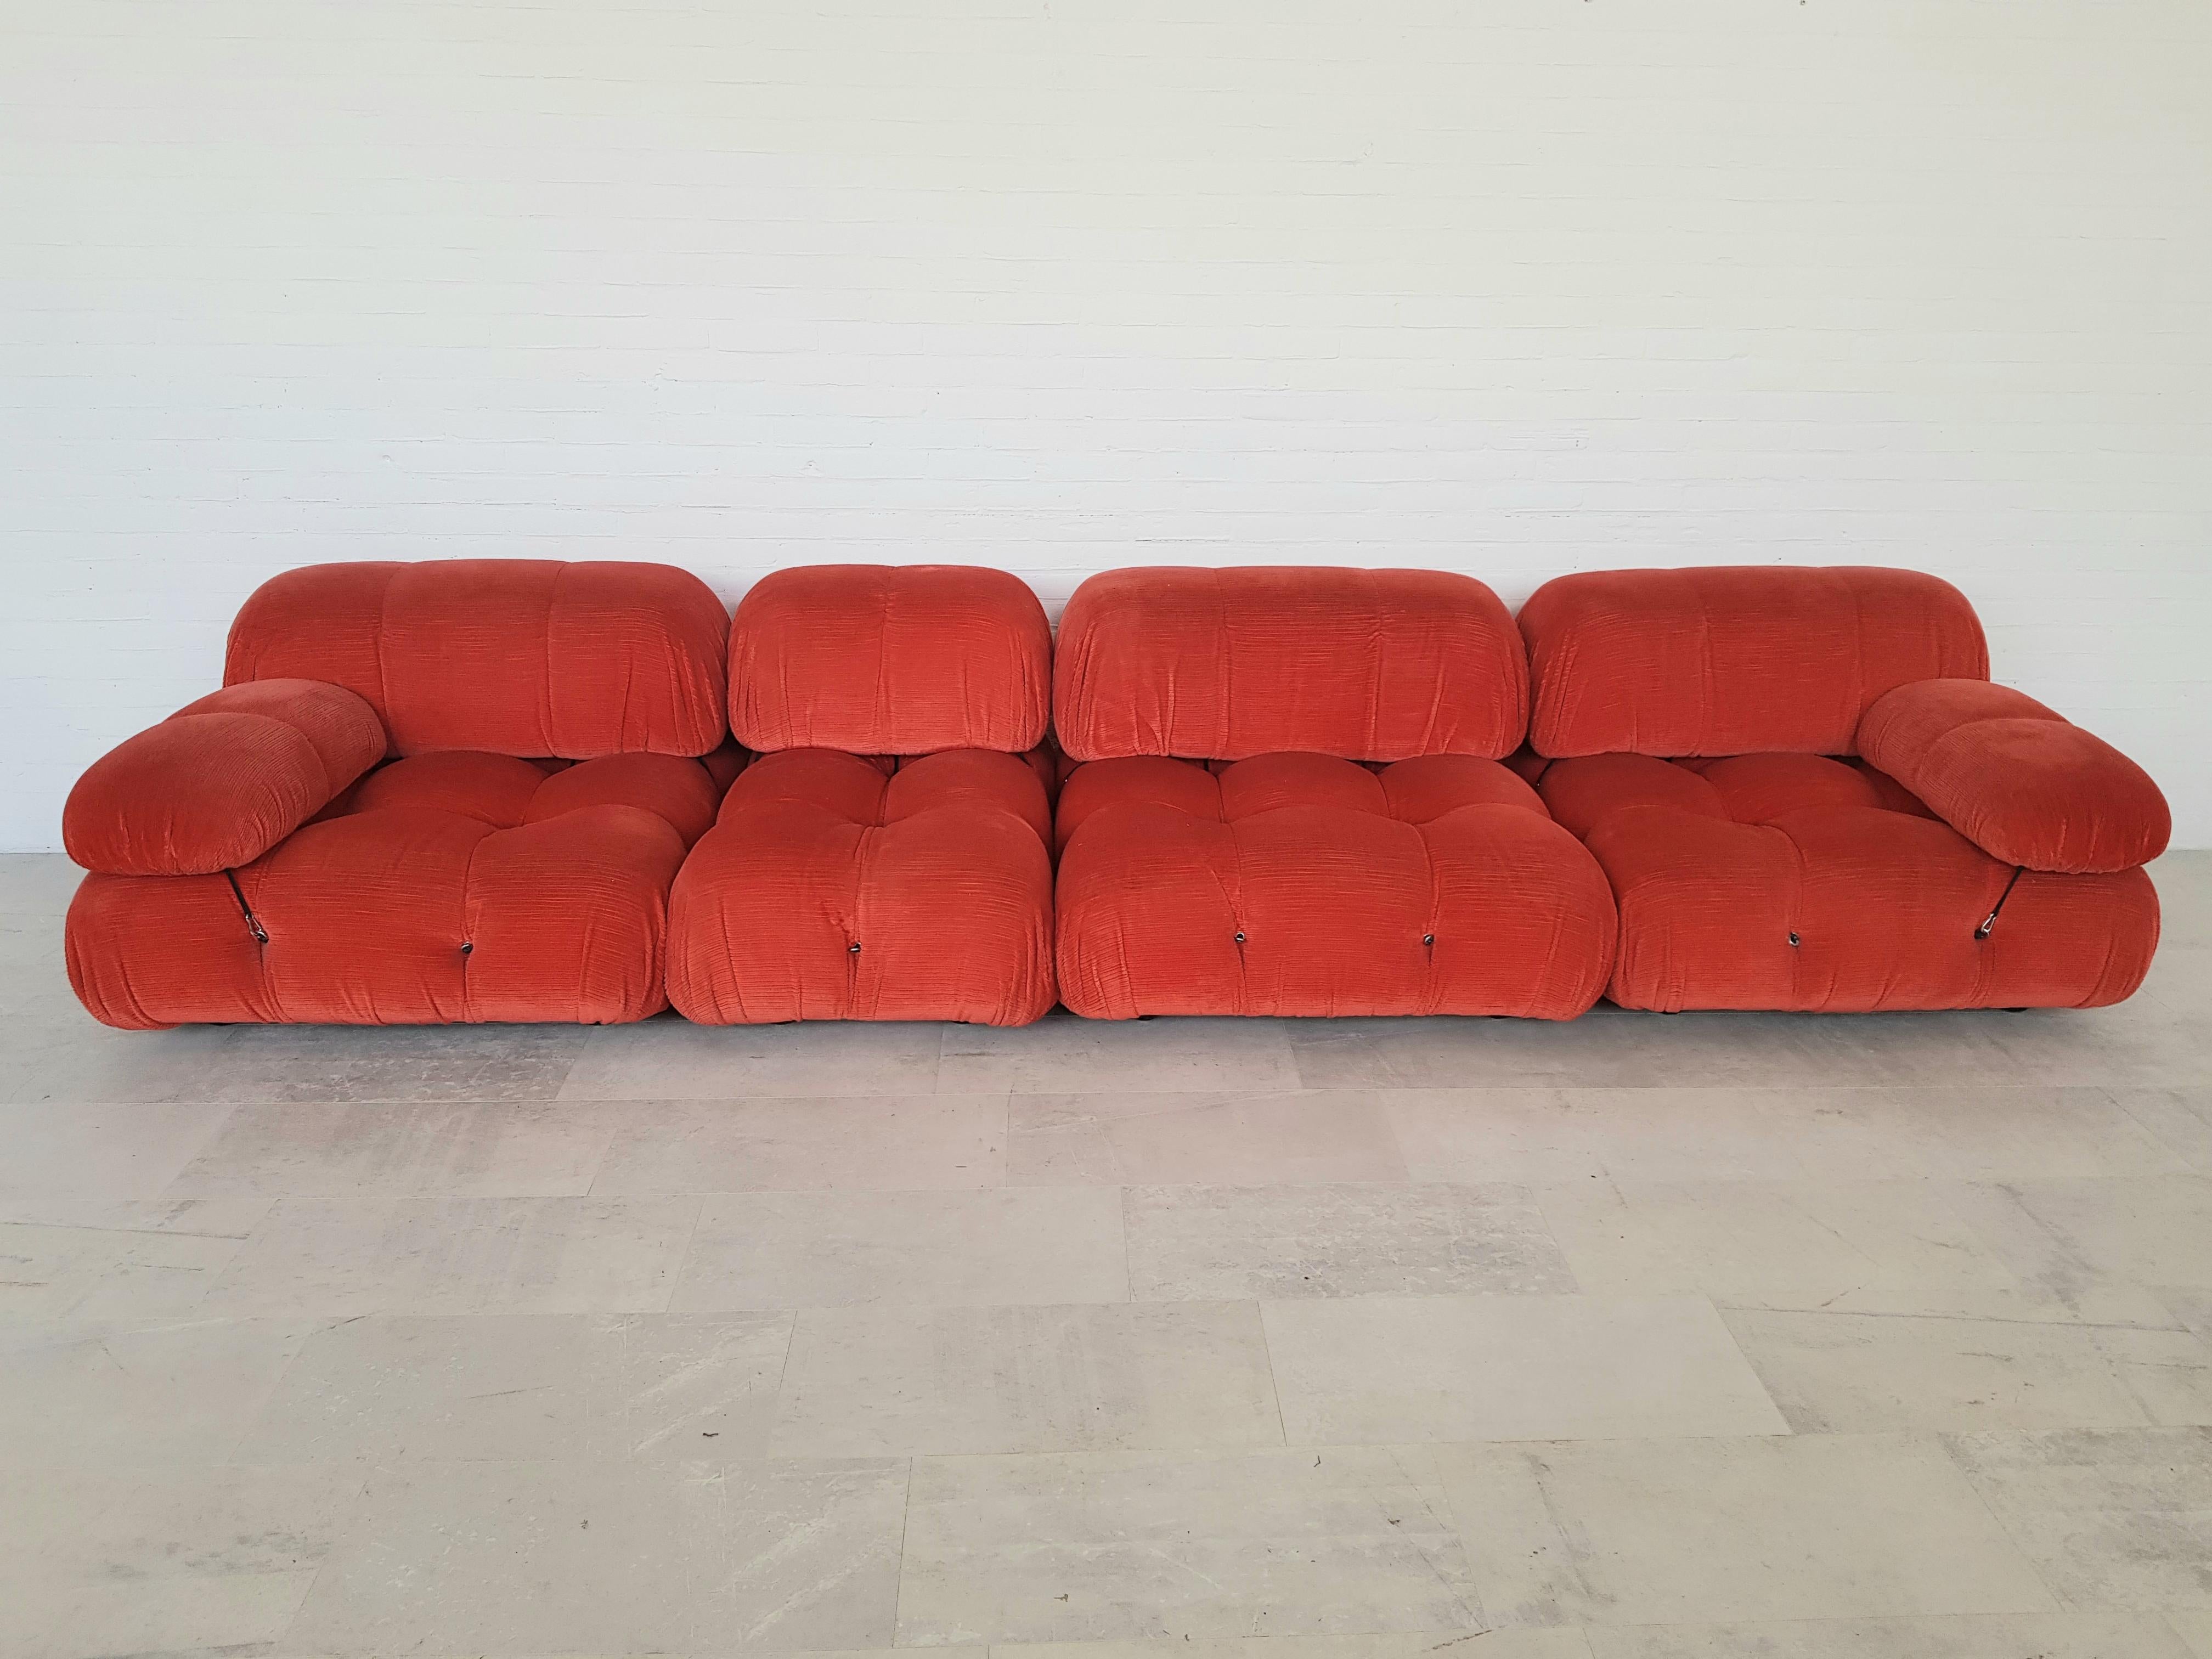 Camaleonda sectional sofa by Mario Bellini for C&B Italia 1971

Postmodern sectional sofa by Mario Bellini for C&B Italia in the 1970s. The entire sofa consists of 3 big seating elements, one ottoman and two armrests. 
As we have a large stock of